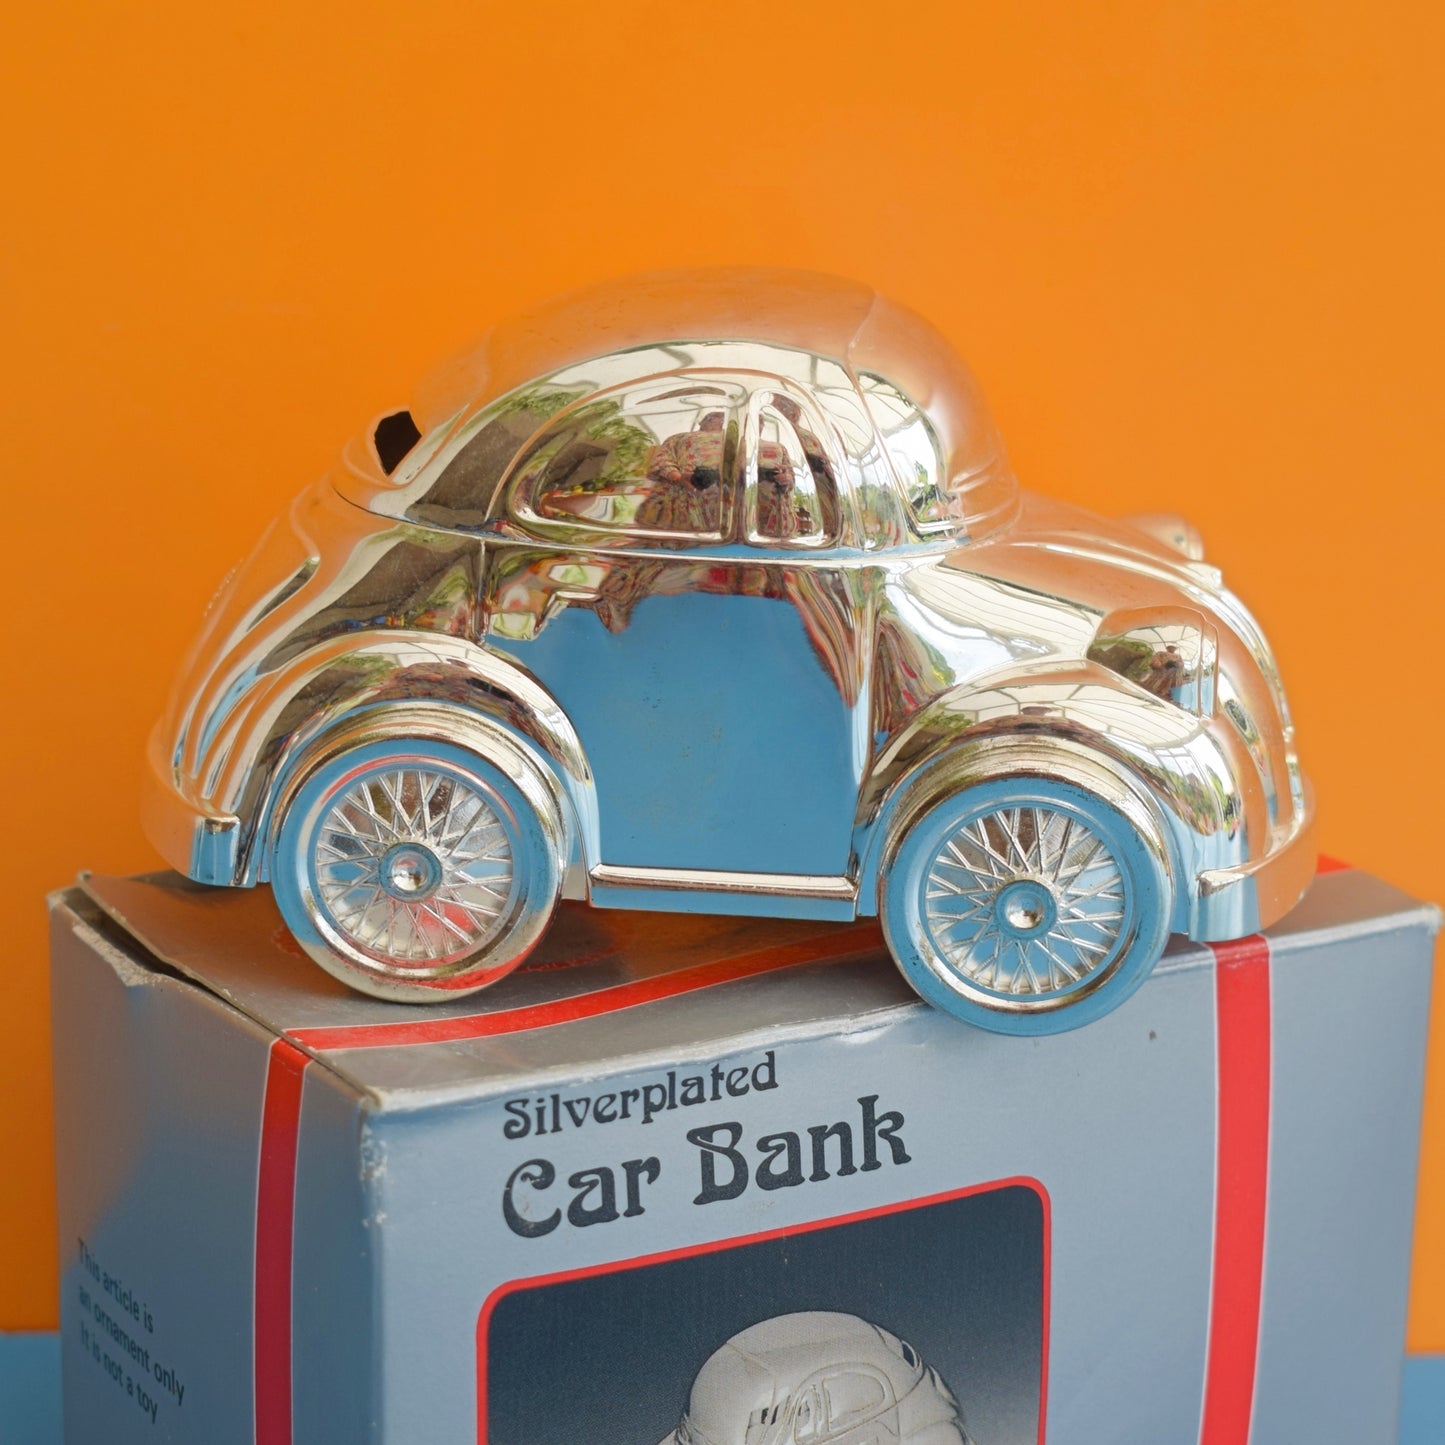 Vintage 1990s Kitsch Boxed Silver Plated Money Boxes